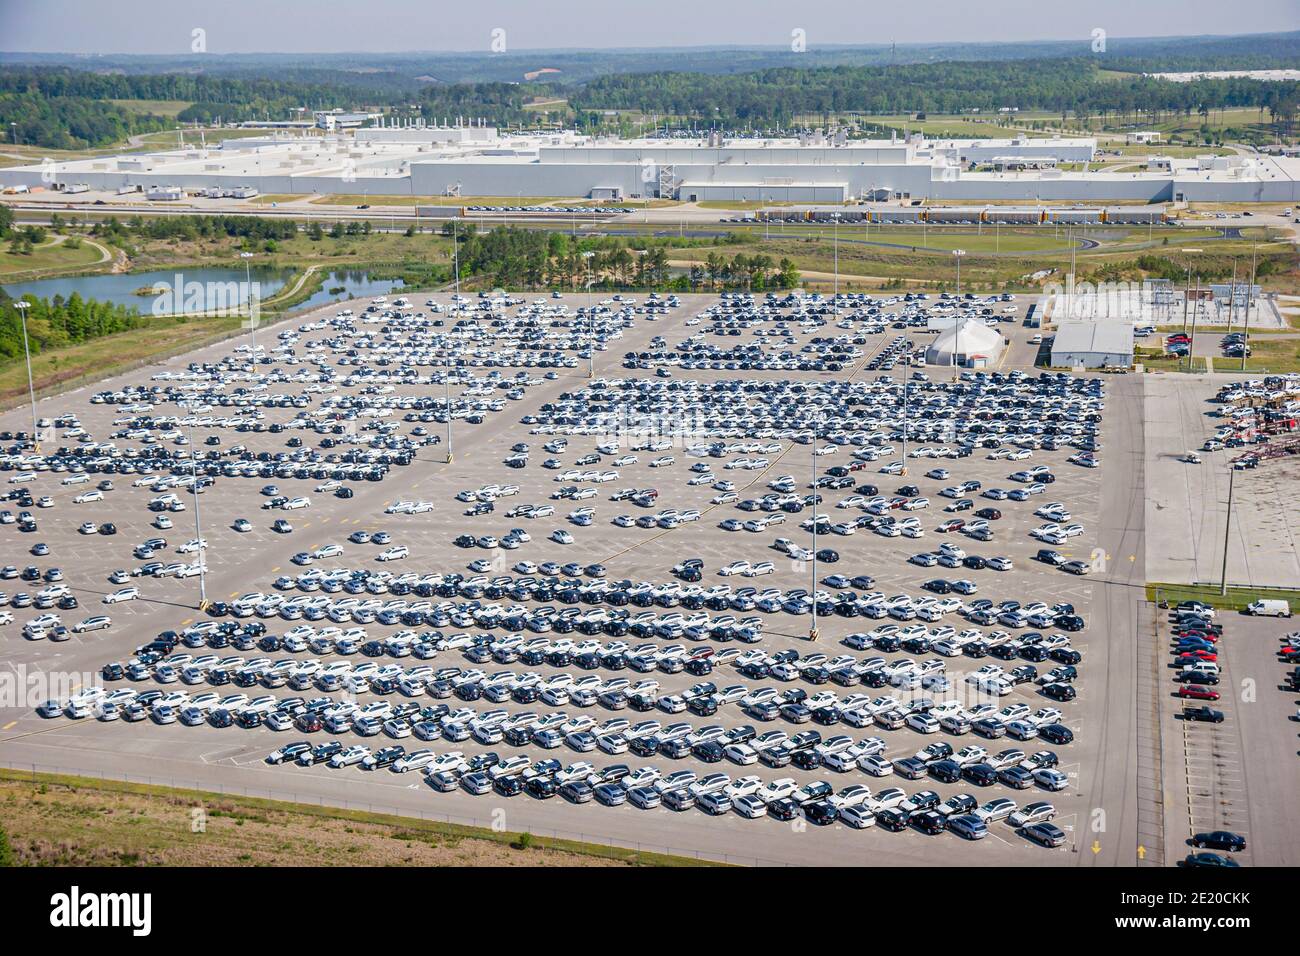 Alabama Vance Mercedes Benz German SUV manufacturing plant,aerial overhead view new vehicles parking lot, Stock Photo